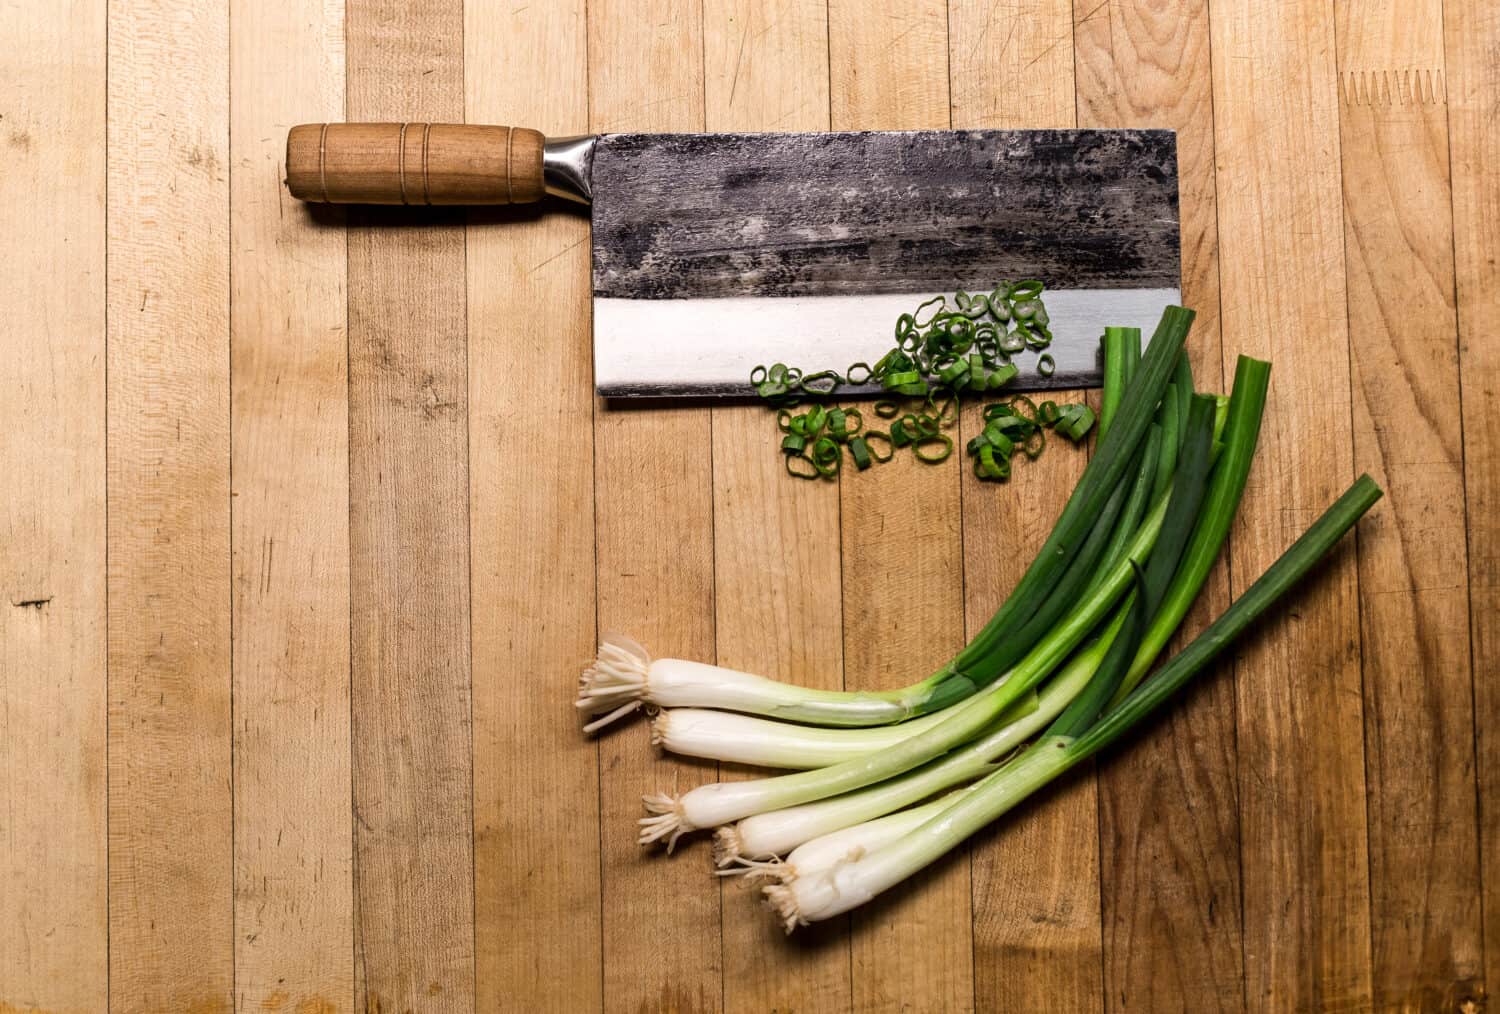 Chinese chopping knife with green onions on a wood cutting board.